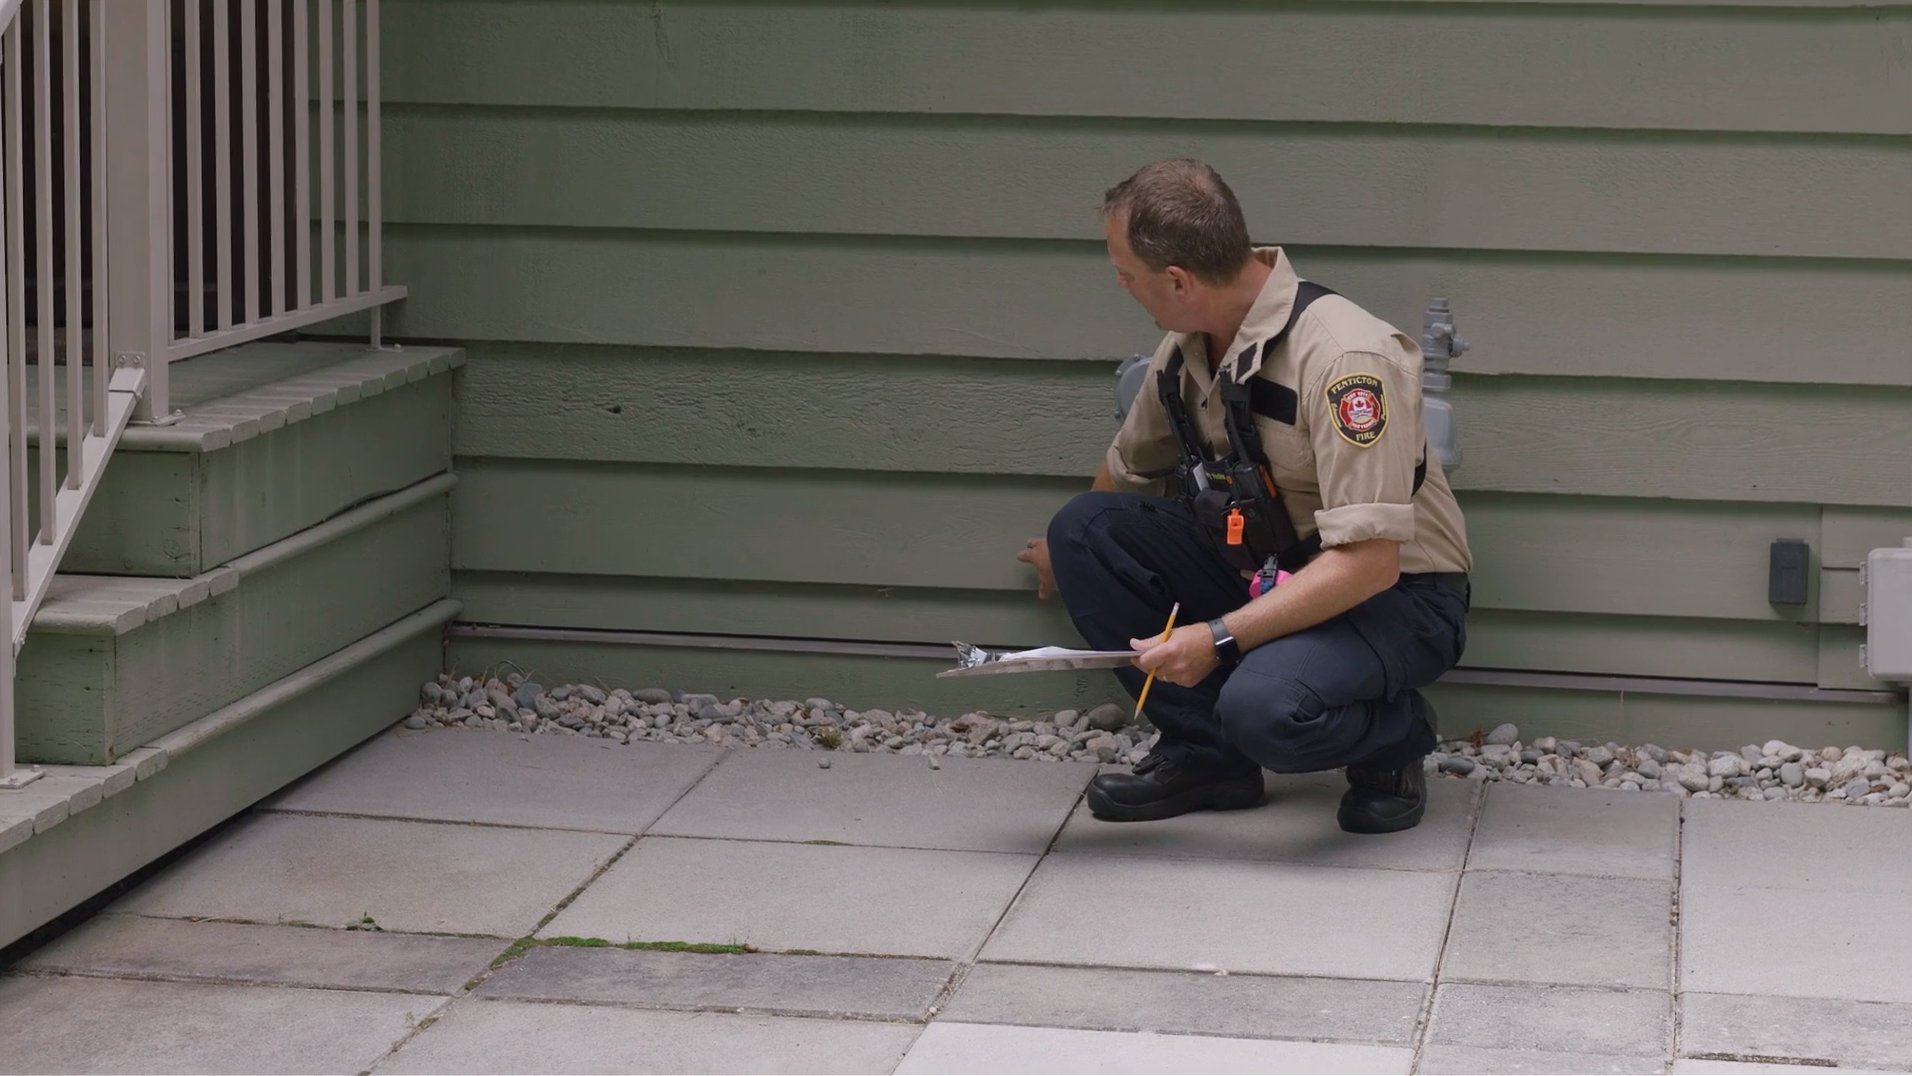 A person in a uniform is kneeling and inspecting the exterior of a house